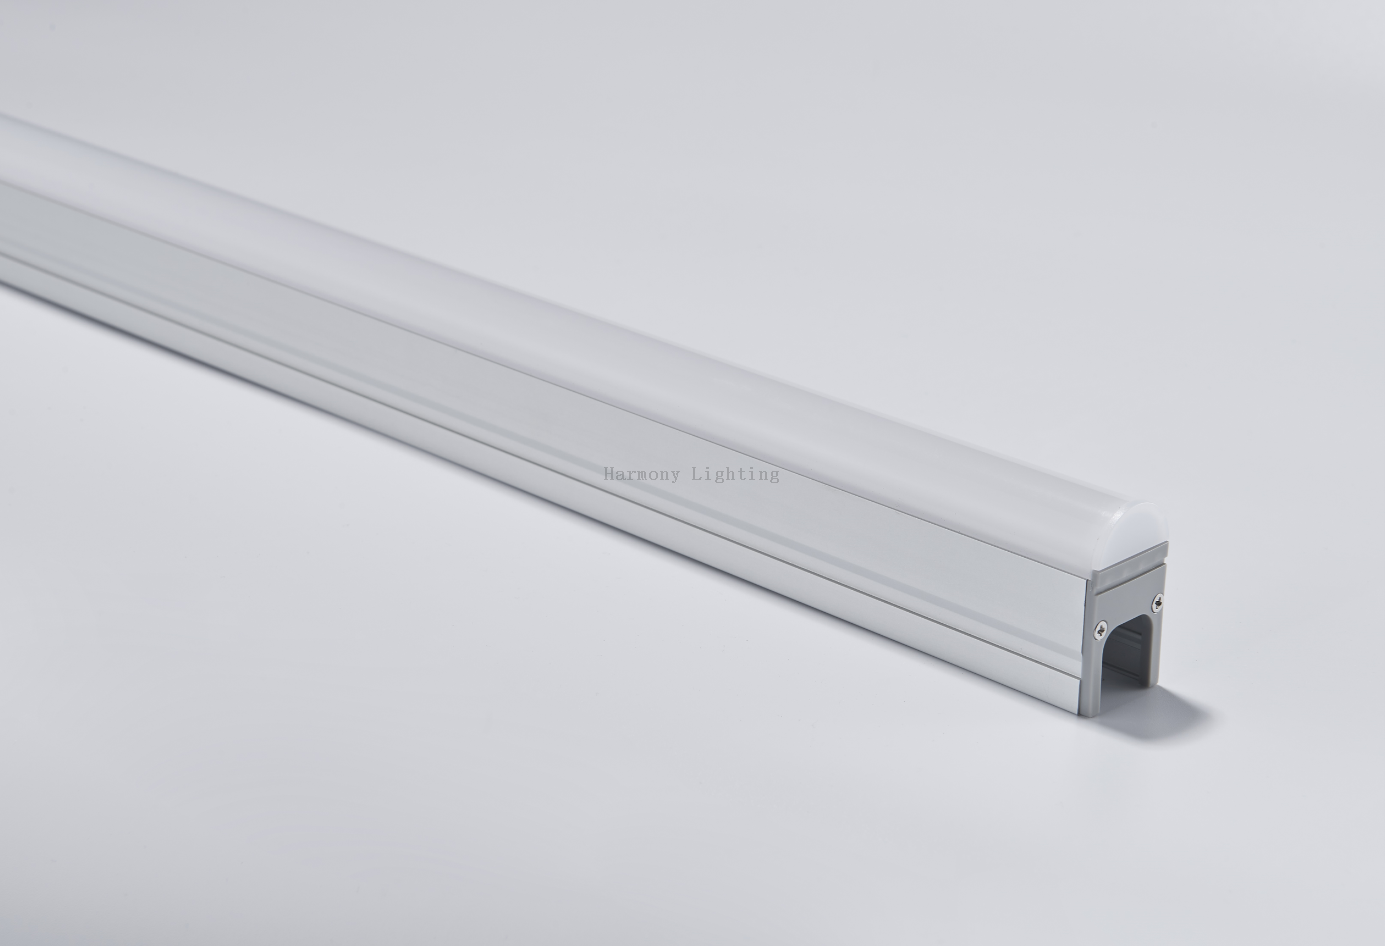 RH-C25 12W IP67 Led Light Linear Wall Washer DC24V Warm White Aluminum Alloy Profile Outdoor Building Wall Washer Facade Lighting